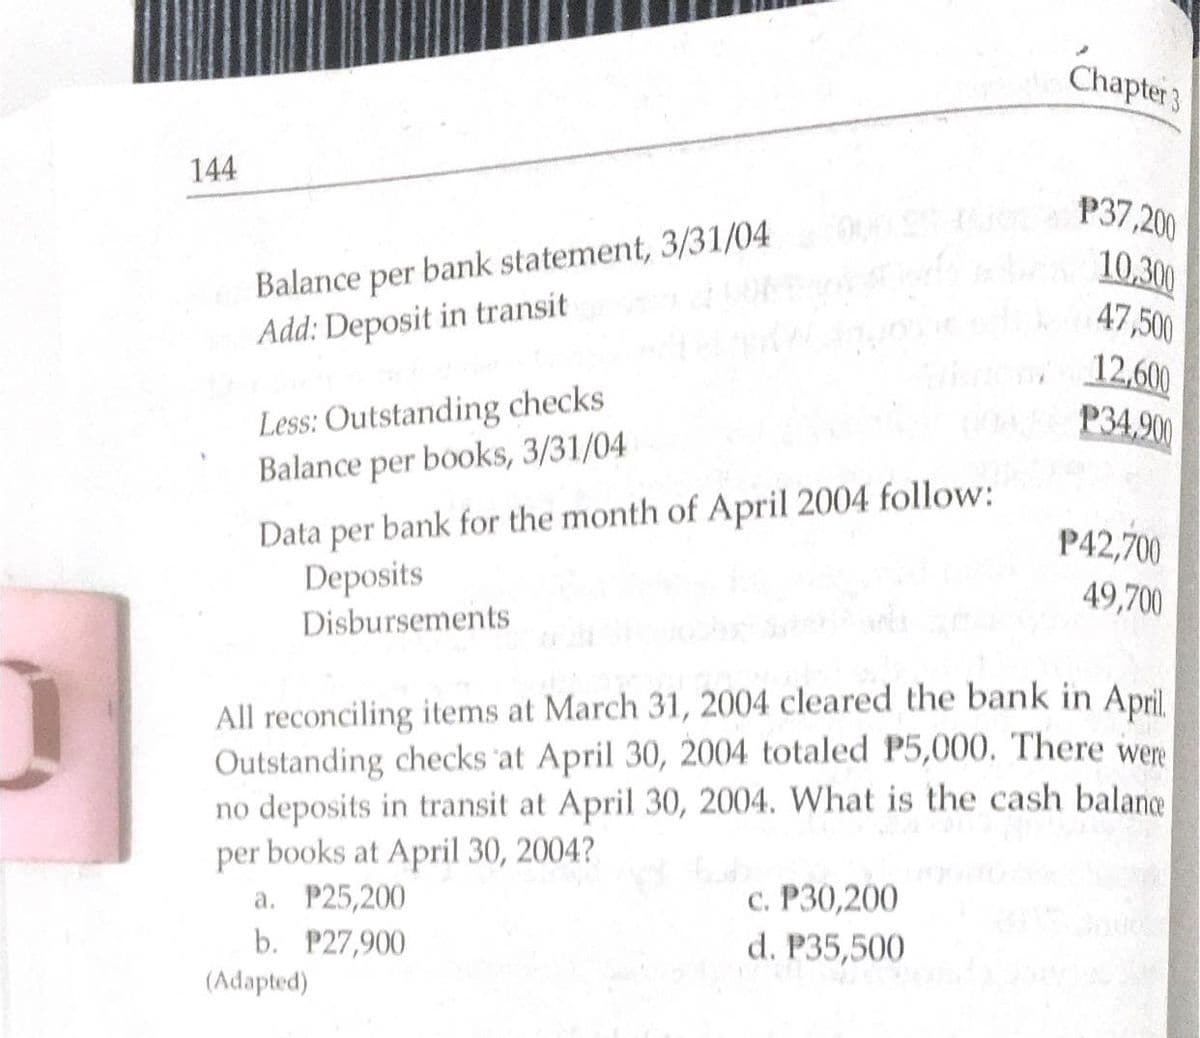 Chapter 3
144
P37,200
10,300
47,500
Balance per bank statement, 3/31/04
Add: Deposit in transit
12,600
EP34,900
Less: Outstanding checks
Balance per books, 3/31/04
Data per bank for the month of April 2004 follow:
P42,700
Deposits
49,700
Disbursements
All reconciling items at March 31, 2004 cleared the bank in April.
Outstanding checks at April 30, 2004 totaled P5,000. There were
no deposits in transit at April 30, 2004. What is the cash balance
per books at April 30, 2004?
a. P25,200
c. P30,200
d. P35,500
b. P27,900
(Adapted)